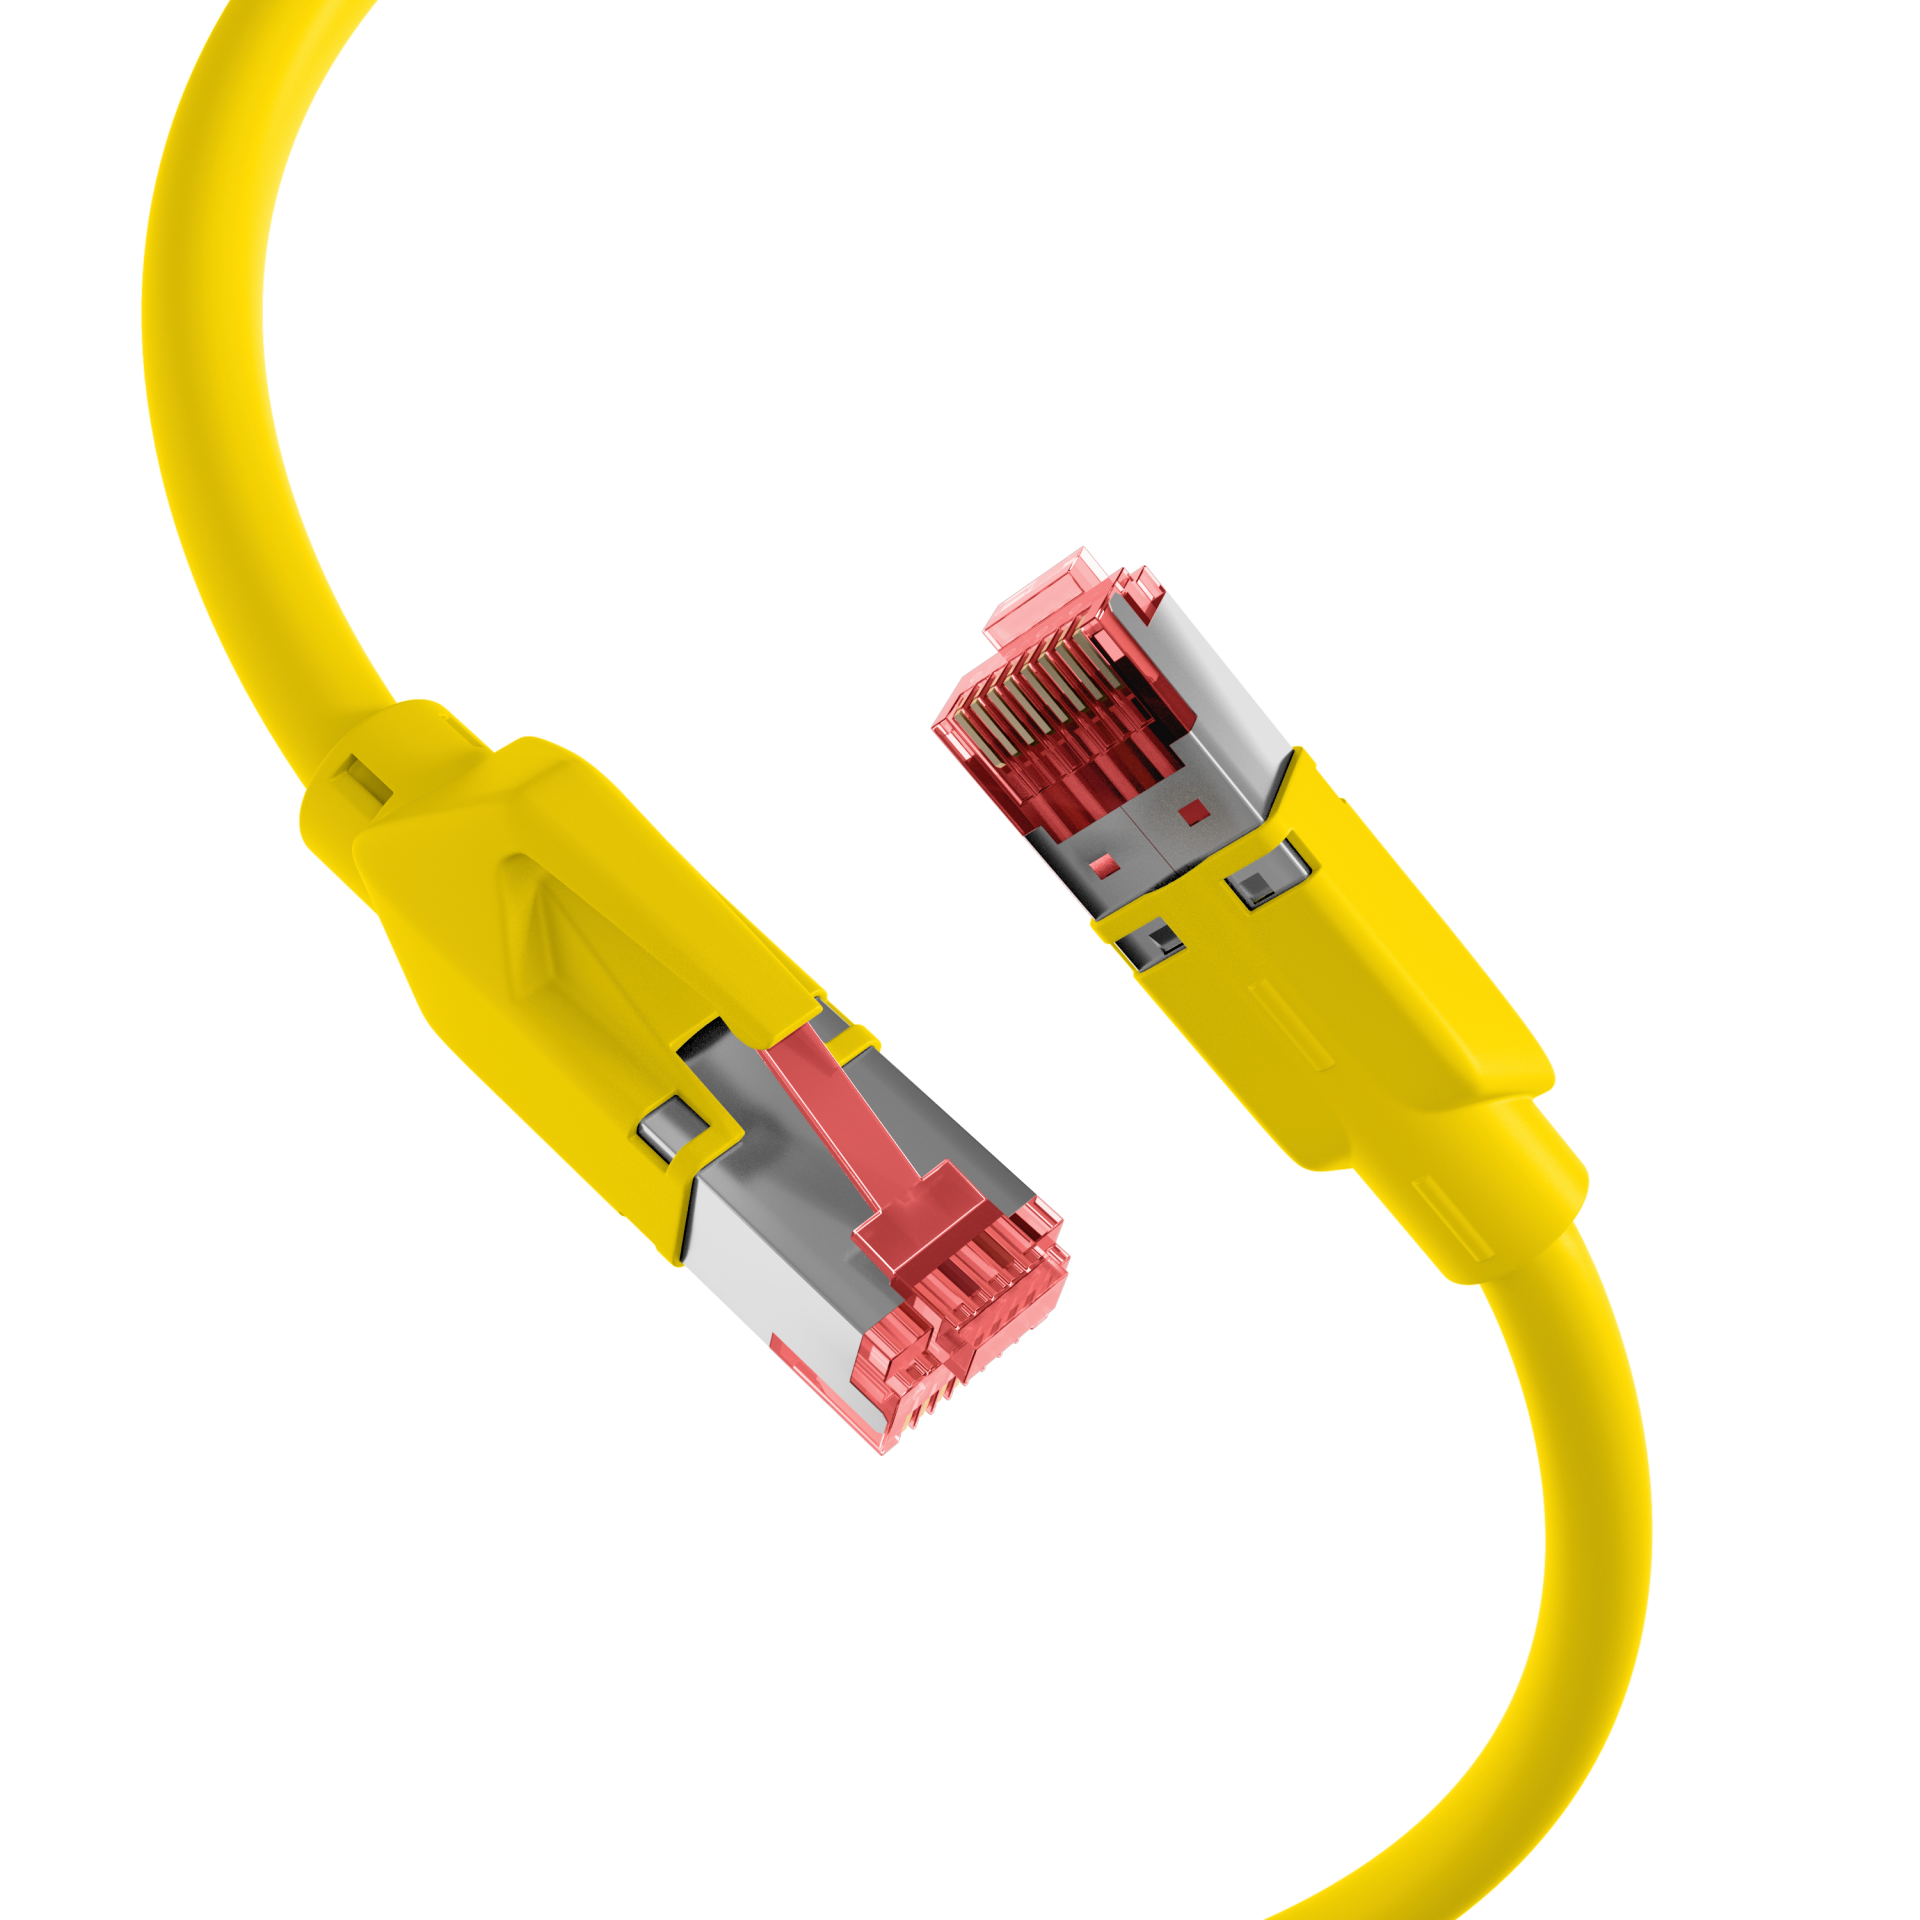 RJ45 Patch Cord Cat.5e SF/UTP PURTM21 for drag chains yellow 5m